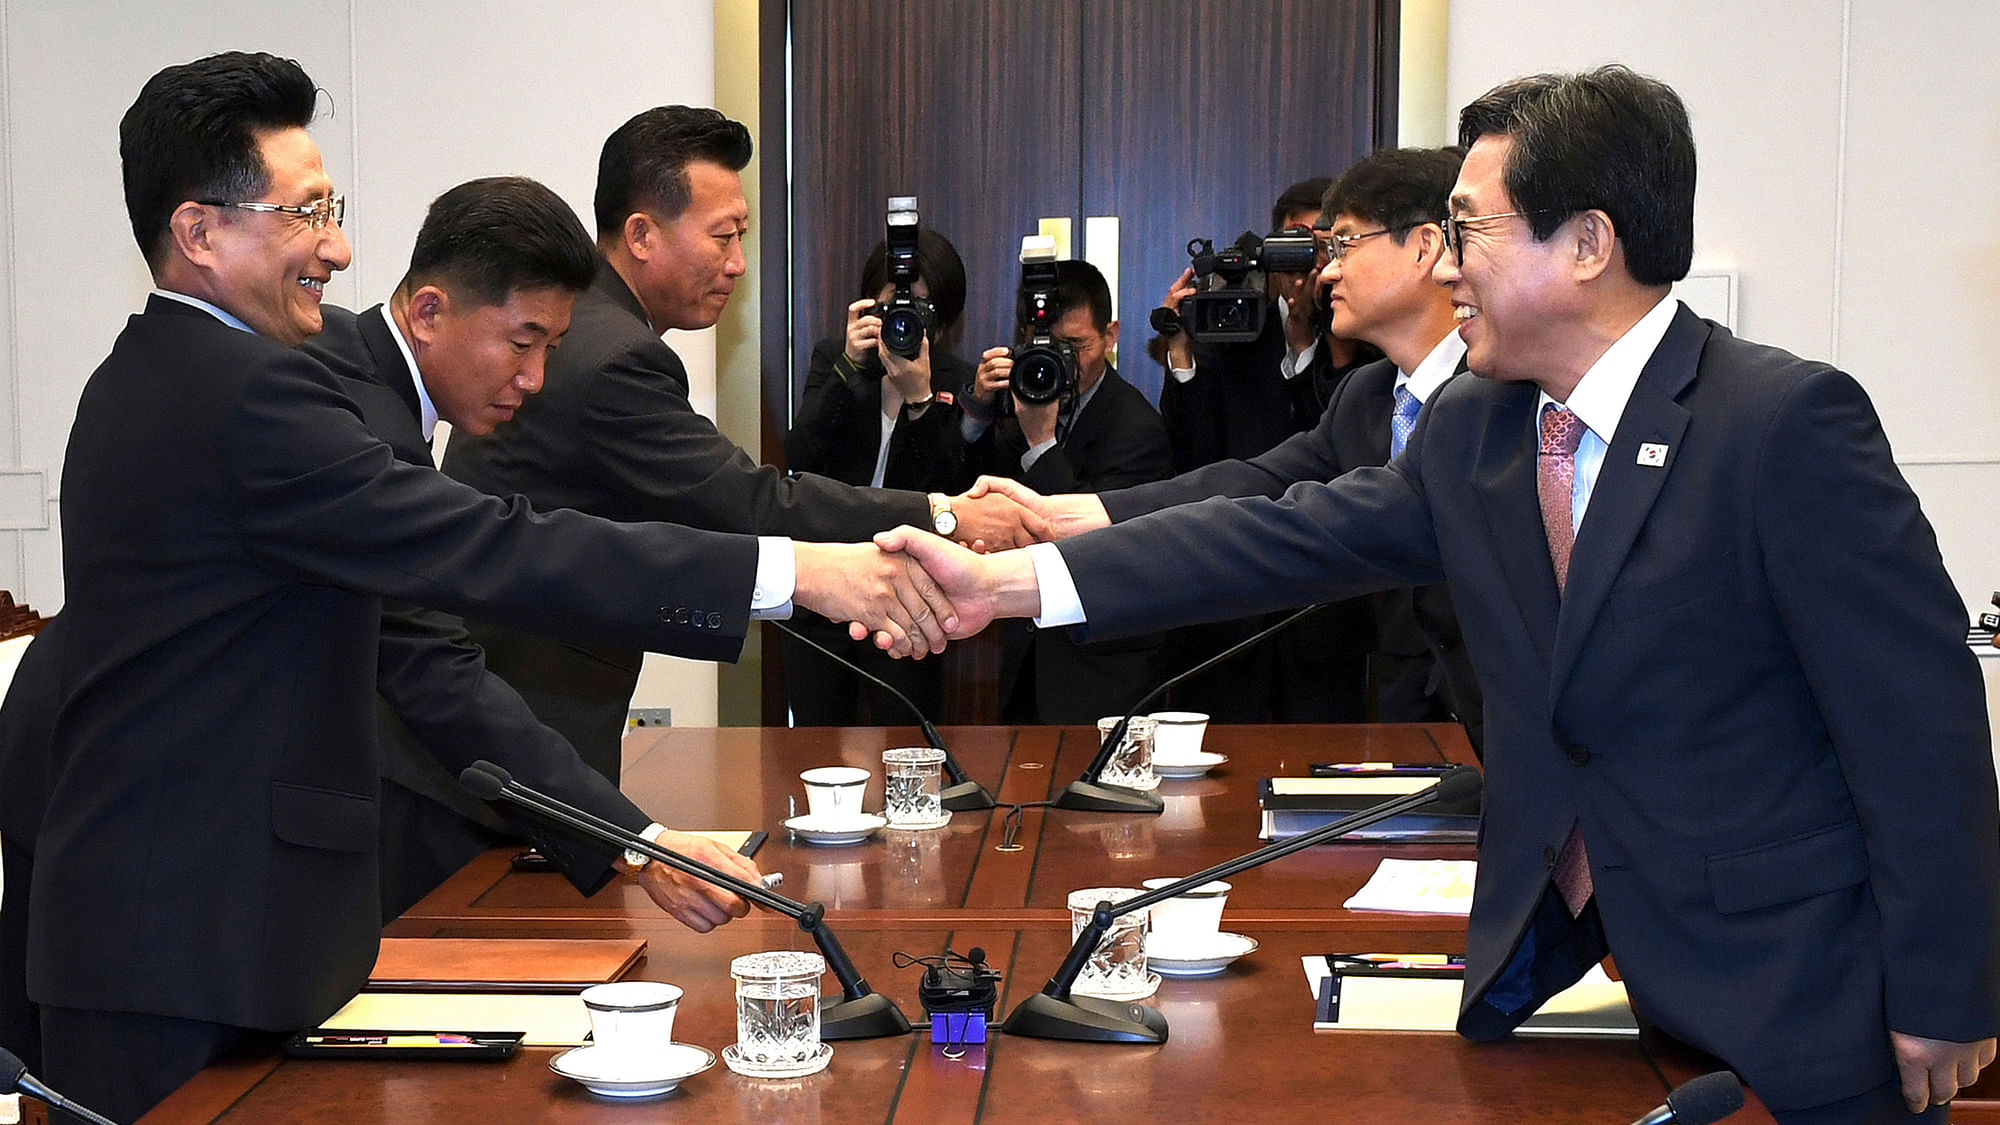 In this photo provided by the South Korea Culture And Sports Ministry, South Korean head delegate Jeon Choong-ryul, right, shakes hands with his North Korean counterpart Won Kil U during a meeting at the southern side of Panmunjom in the Demilitarized Zone, North Korea, Monday, 18 June 2018.&nbsp;